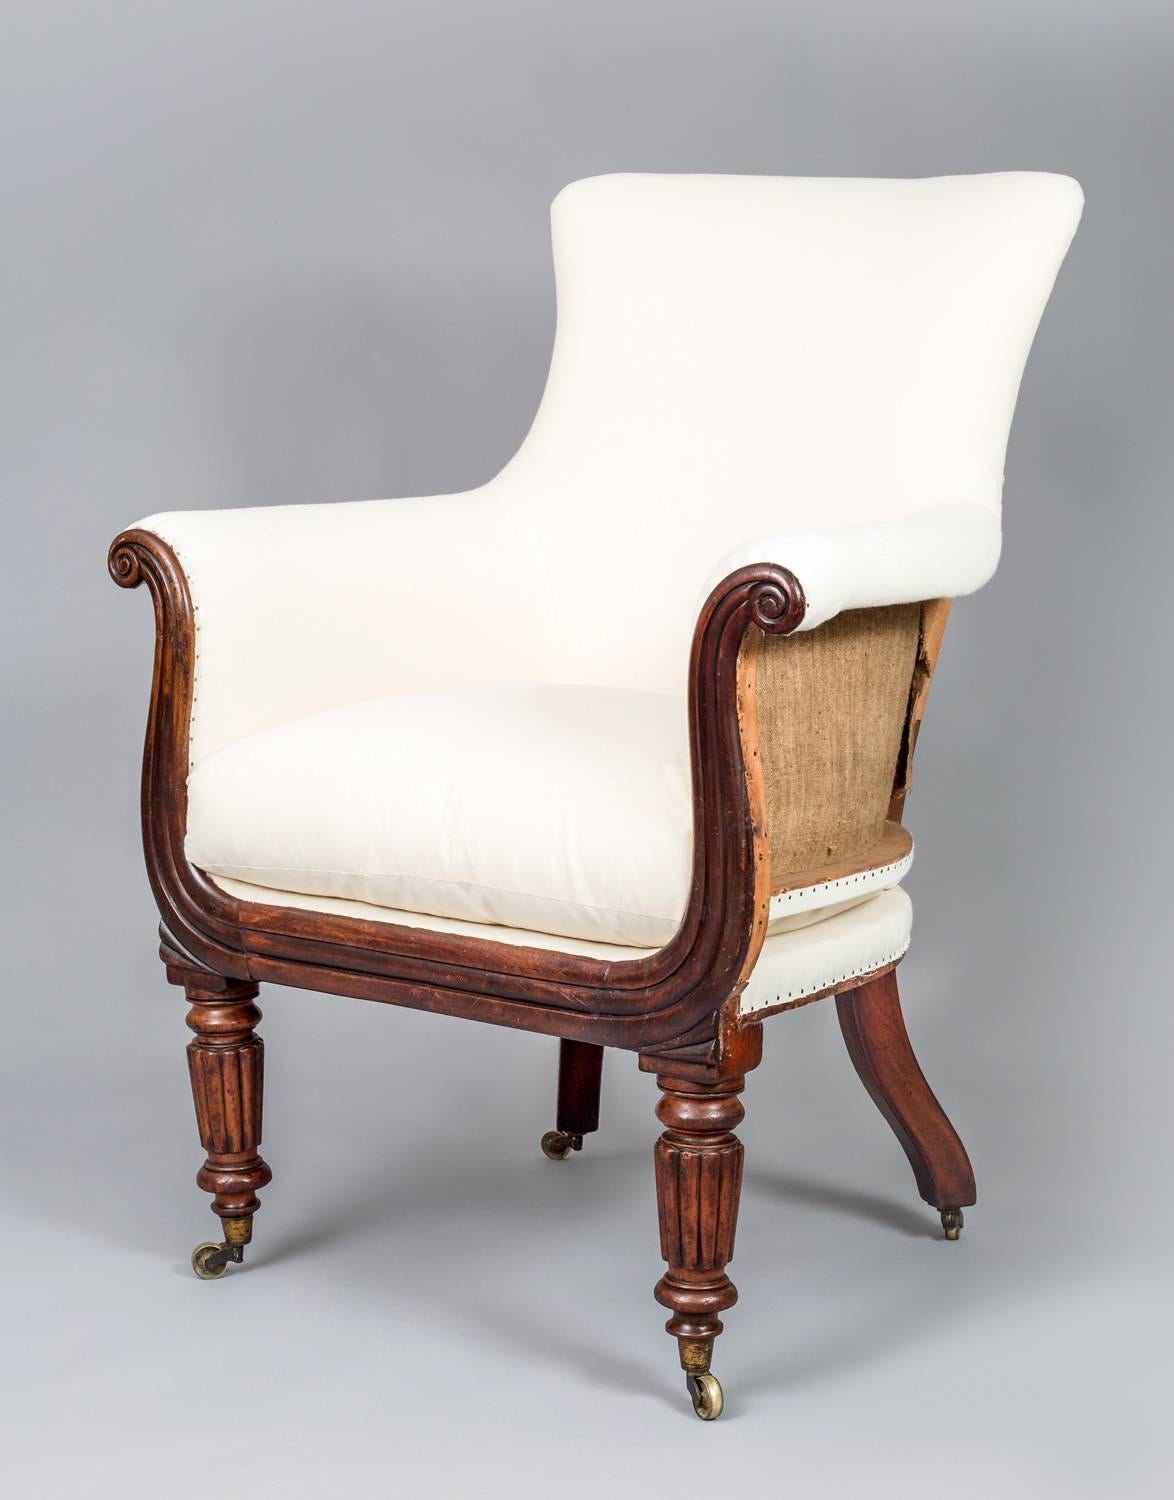 Regency mahogany lyre-shaped armchair, the down filled cushion seat on reeded turned tapering front legs, back swept back legs, all on brass casters. Partially upholstered in white cotton. Ready for re-upholstery.